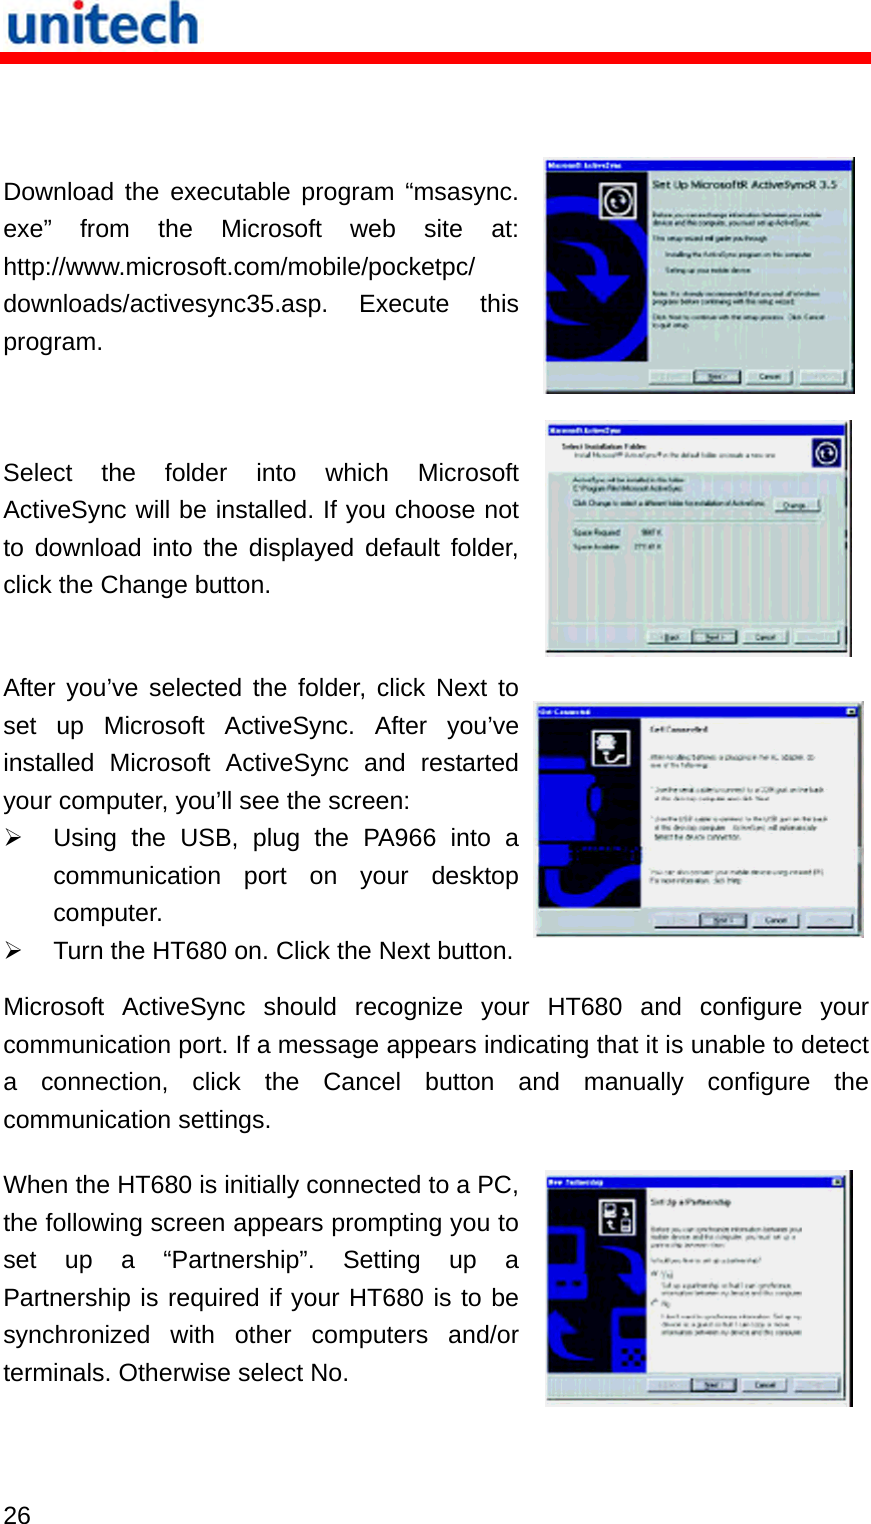   26   Download the executable program “msasync. exe” from the Microsoft web site at: http://www.microsoft.com/mobile/pocketpc/ downloads/activesync35.asp. Execute this program.  Select the folder into which Microsoft ActiveSync will be installed. If you choose not to download into the displayed default folder, click the Change button.  After you’ve selected the folder, click Next to set up Microsoft ActiveSync. After you’ve installed Microsoft ActiveSync and restarted your computer, you’ll see the screen:   Using the USB, plug the PA966 into a communication port on your desktop computer.   Turn the HT680 on. Click the Next button.Microsoft ActiveSync should recognize your HT680 and configure your communication port. If a message appears indicating that it is unable to detect a connection, click the Cancel button and manually configure the communication settings. When the HT680 is initially connected to a PC, the following screen appears prompting you to set up a “Partnership”. Setting up a Partnership is required if your HT680 is to be synchronized with other computers and/or terminals. Otherwise select No.   